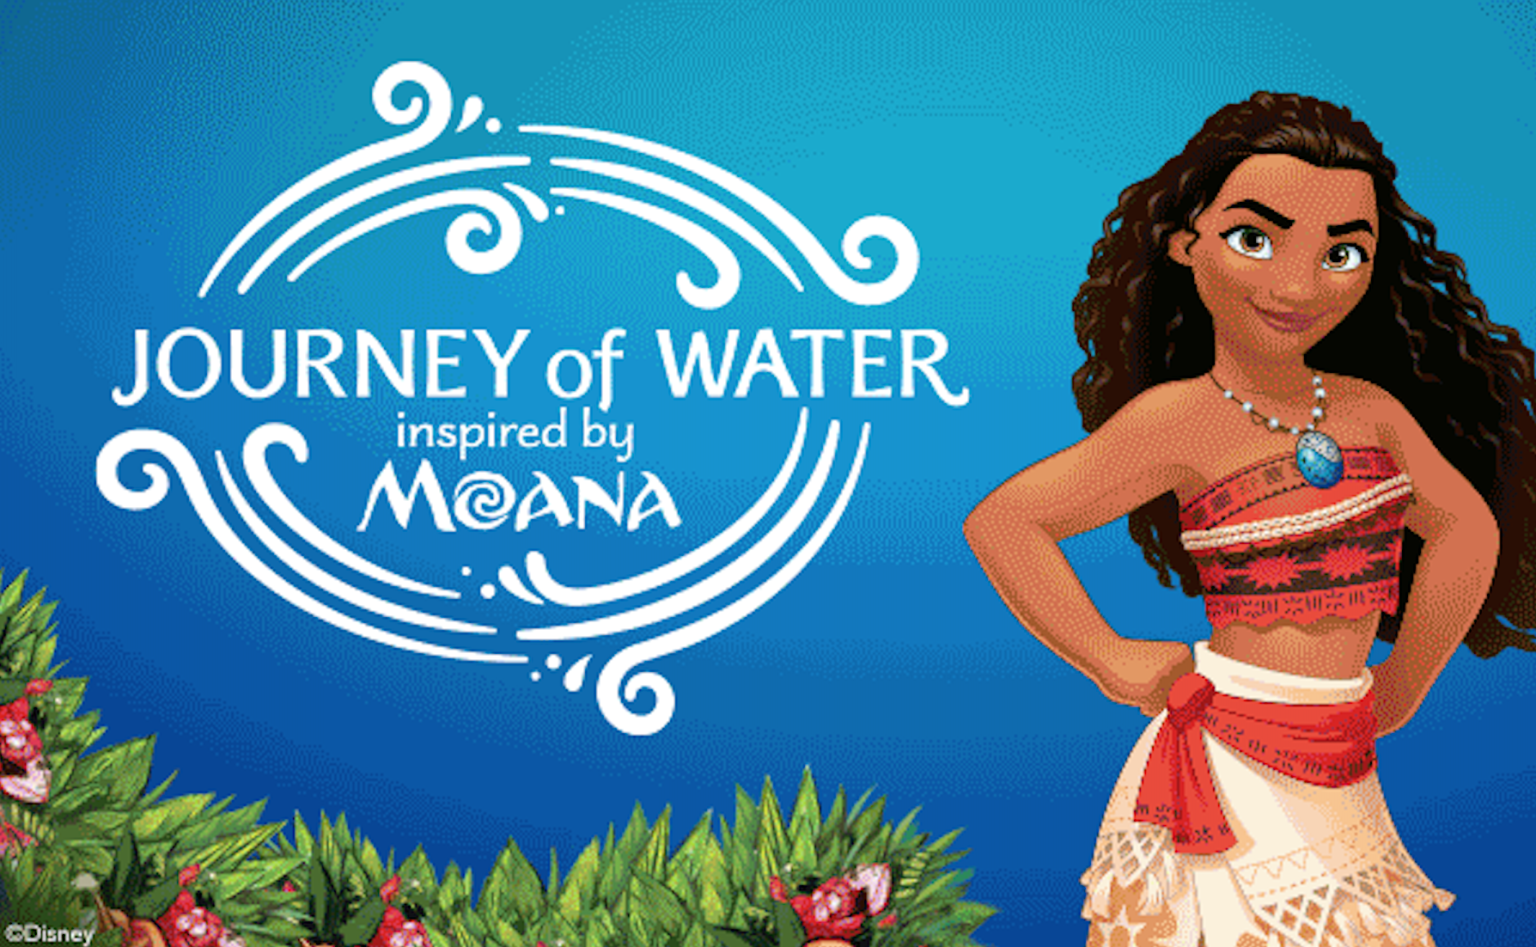 Journey-of-water-inspired-by-moana-logo